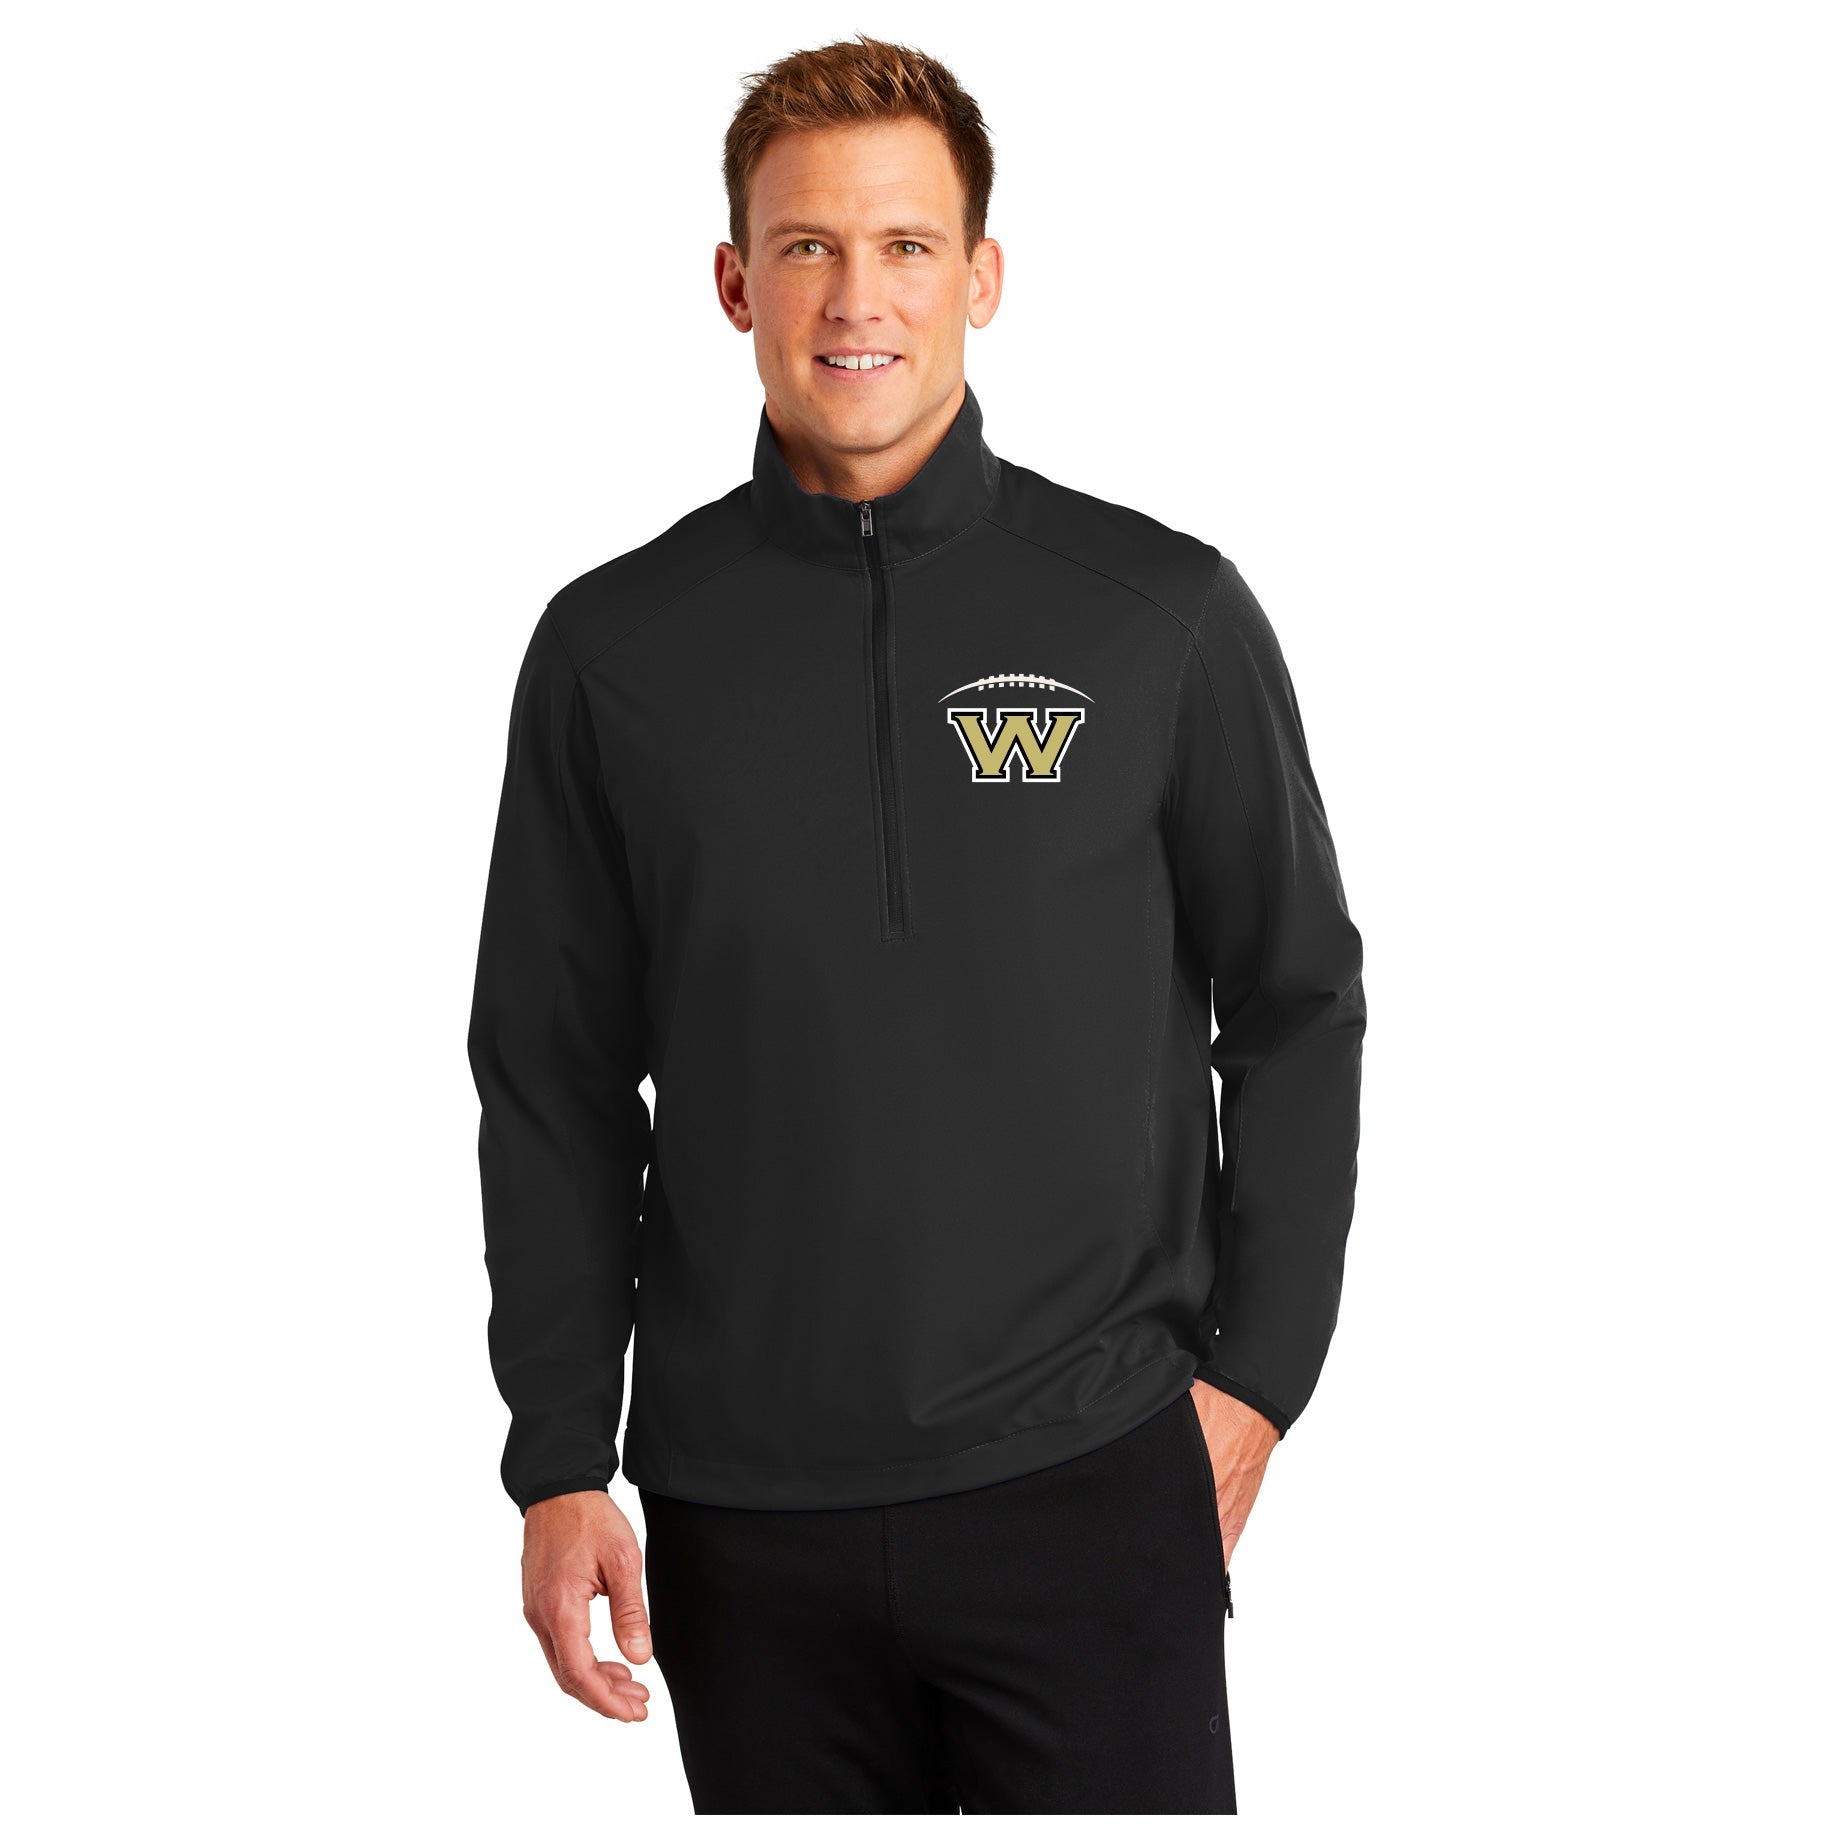 WESTVIEW FOOTBALL LEFT CHEST EMBROIDERY - ACTIVE 1/2-ZIP SOFT SHELL JACKET